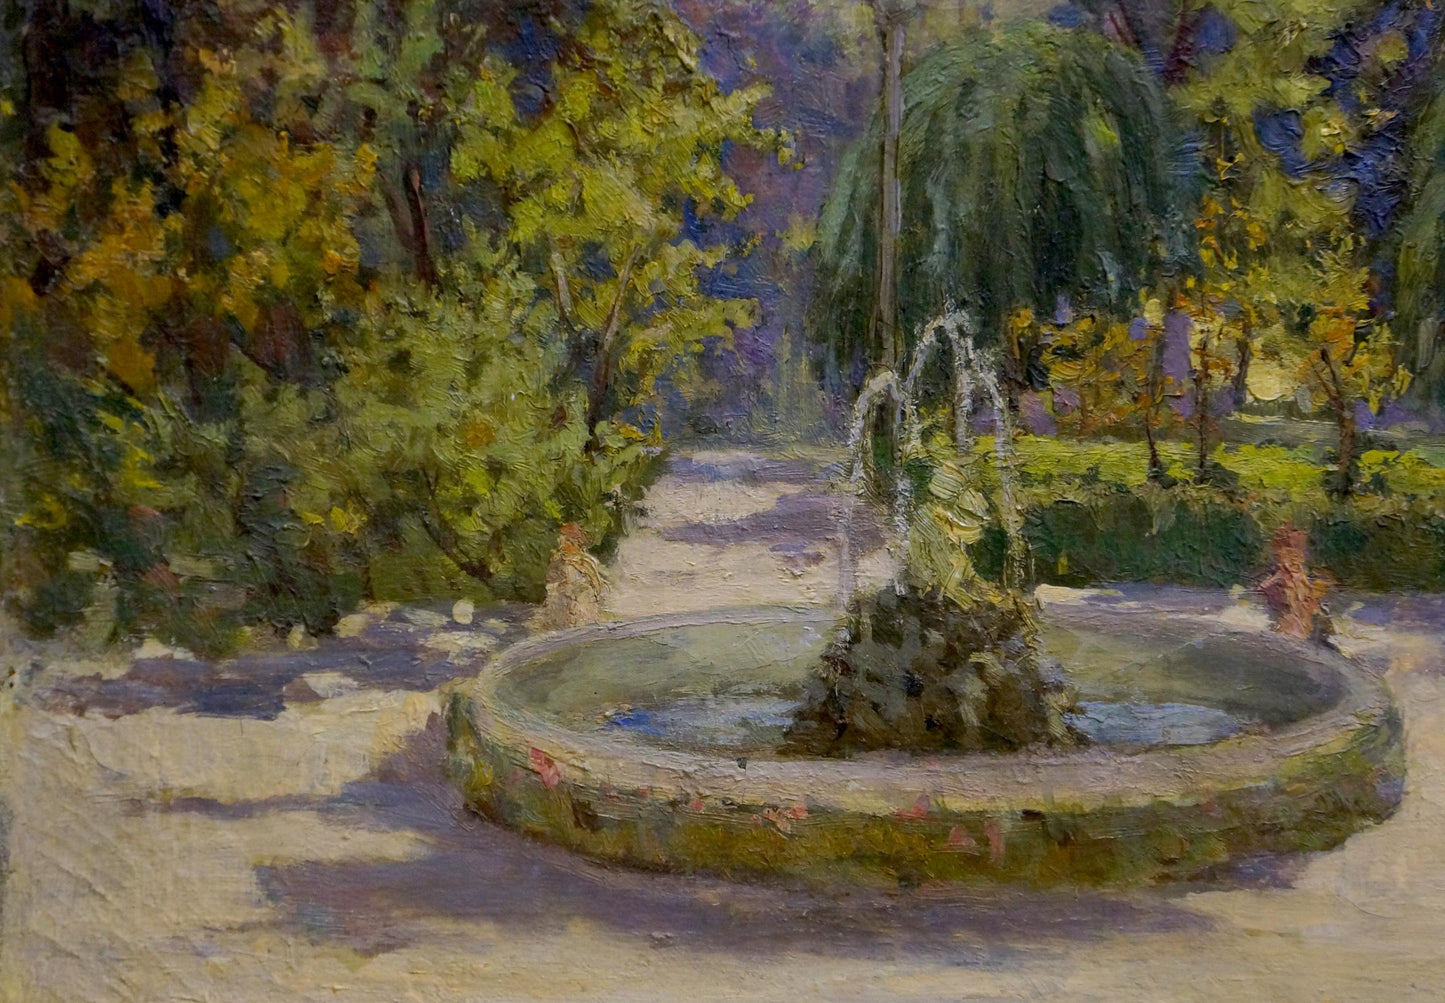 Depiction of a park by Nevkrytyy Denys Nykyforovych in oil